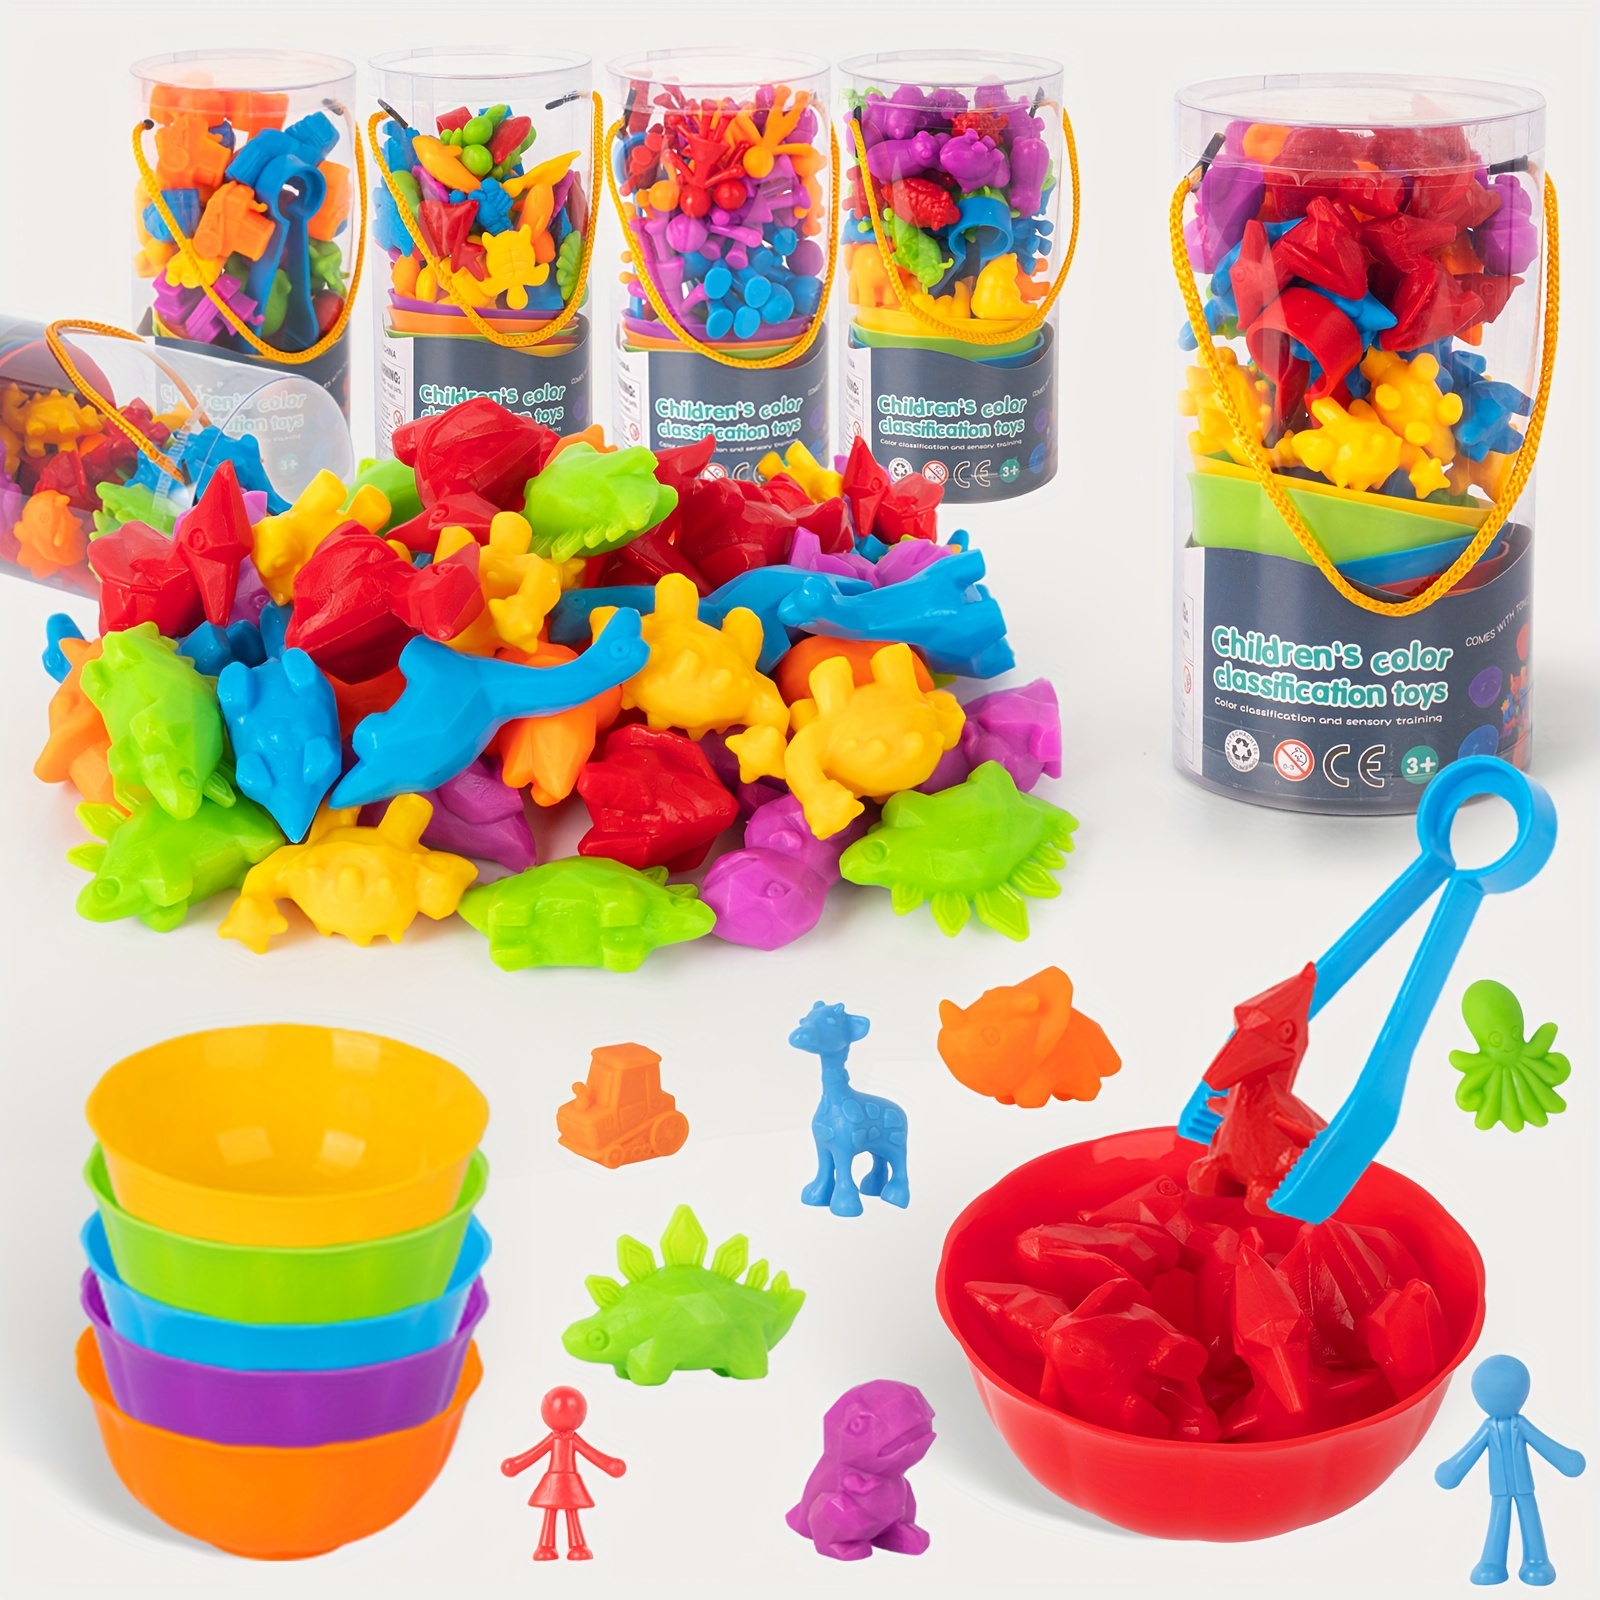 

Cartoon Dinosaur/doll/marine Life/wildlife/vehicle Shapes Montessori Counting & Sorting Toy Set With Colorful Bowls - Stem Educational Game, Perfect Holiday Gift